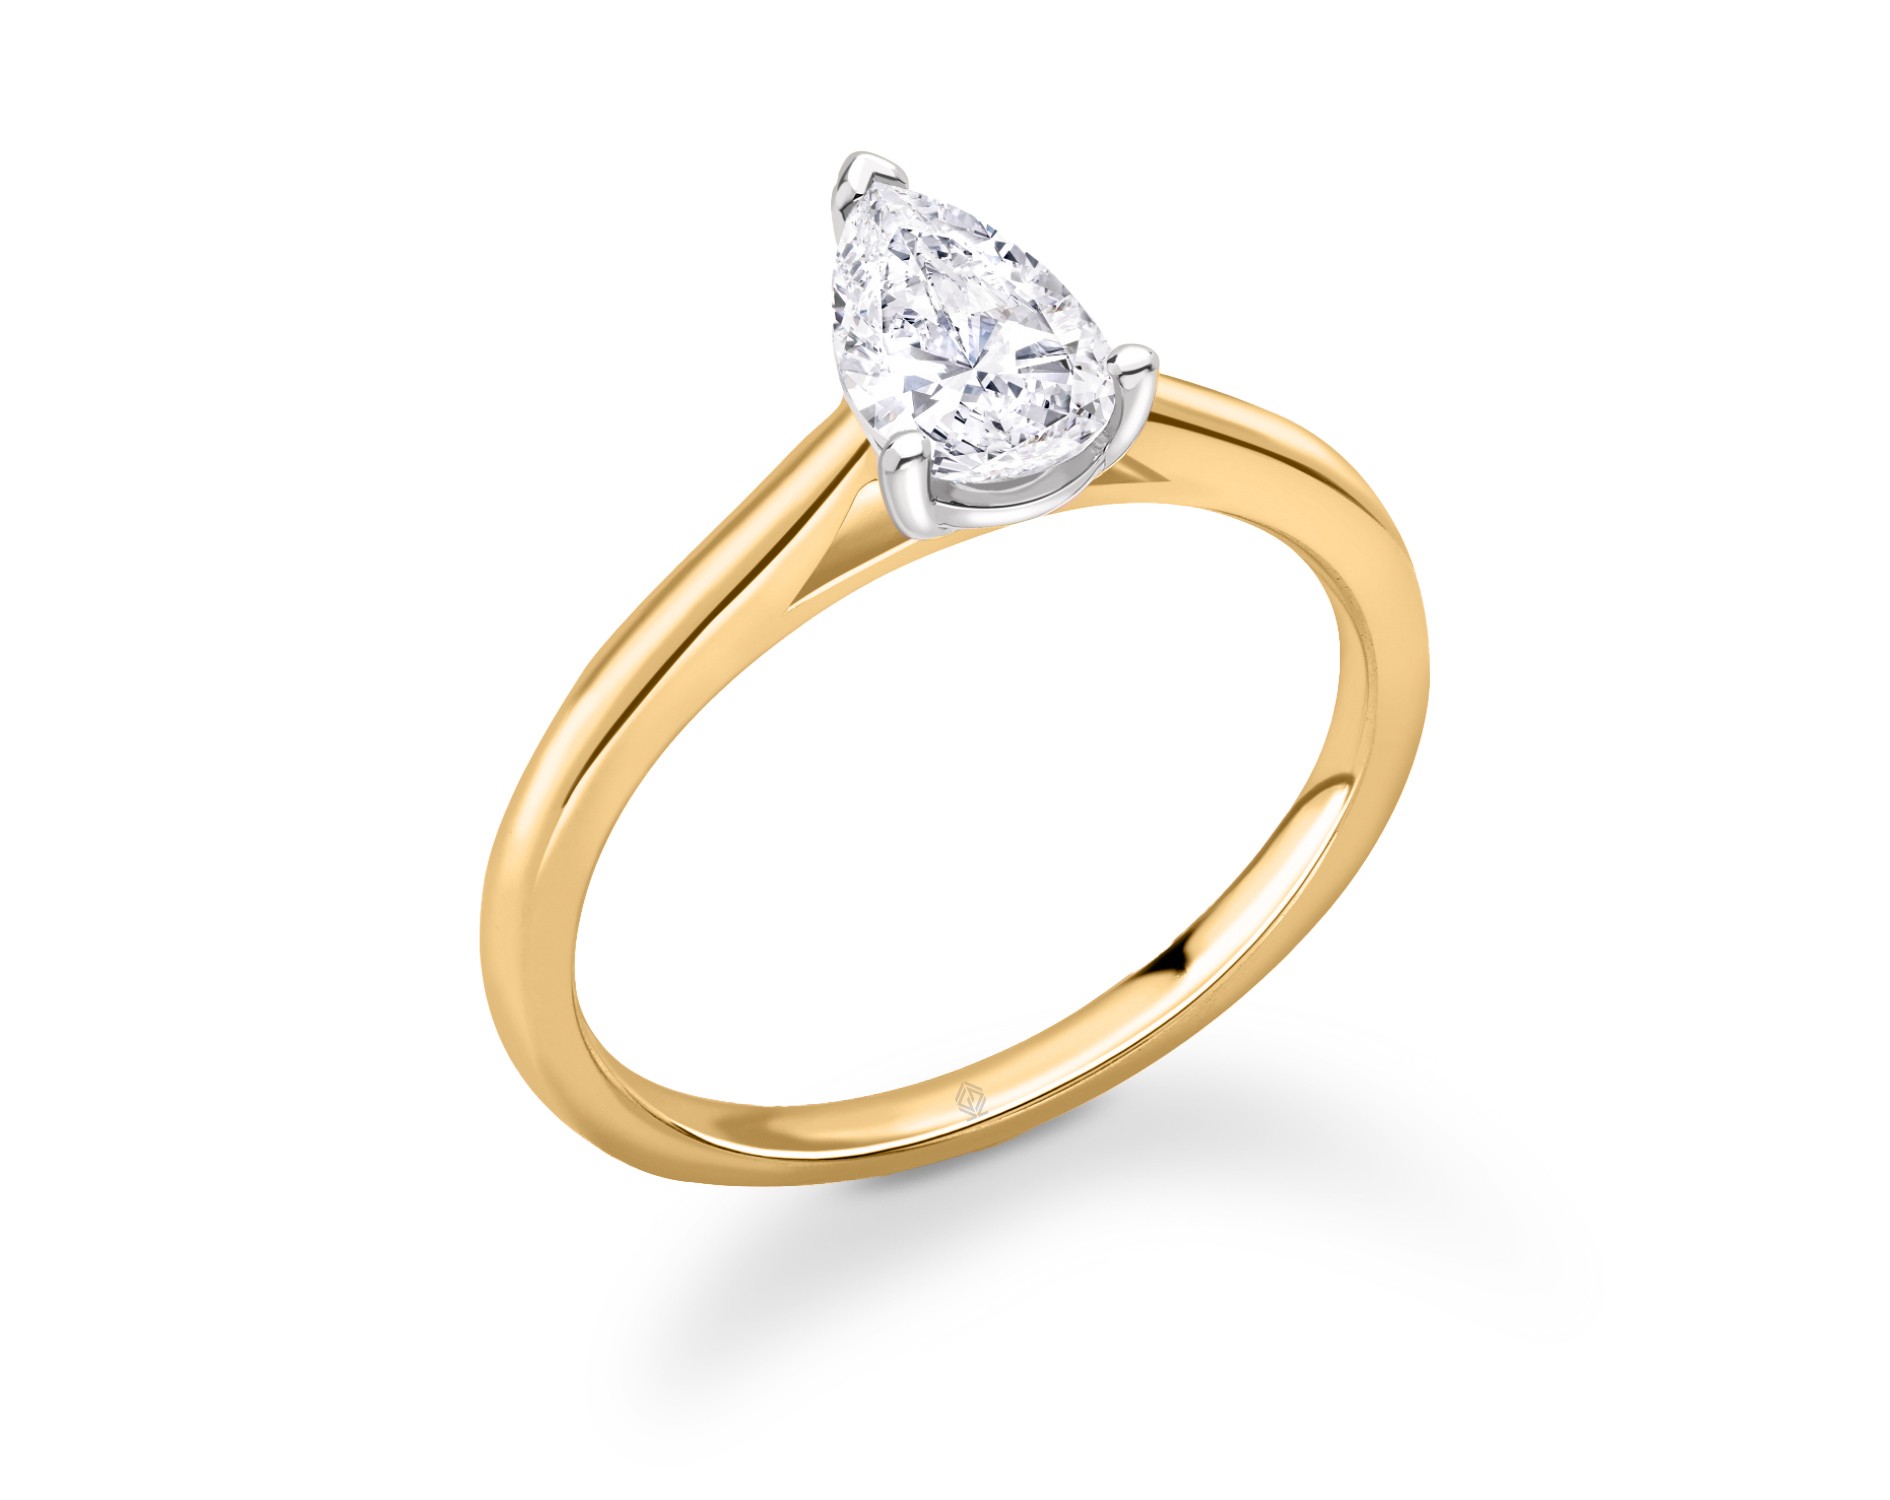 DUAL-TONE PEAR CUT SOLITAIRE DIAMOND ENGAGEMENT RING